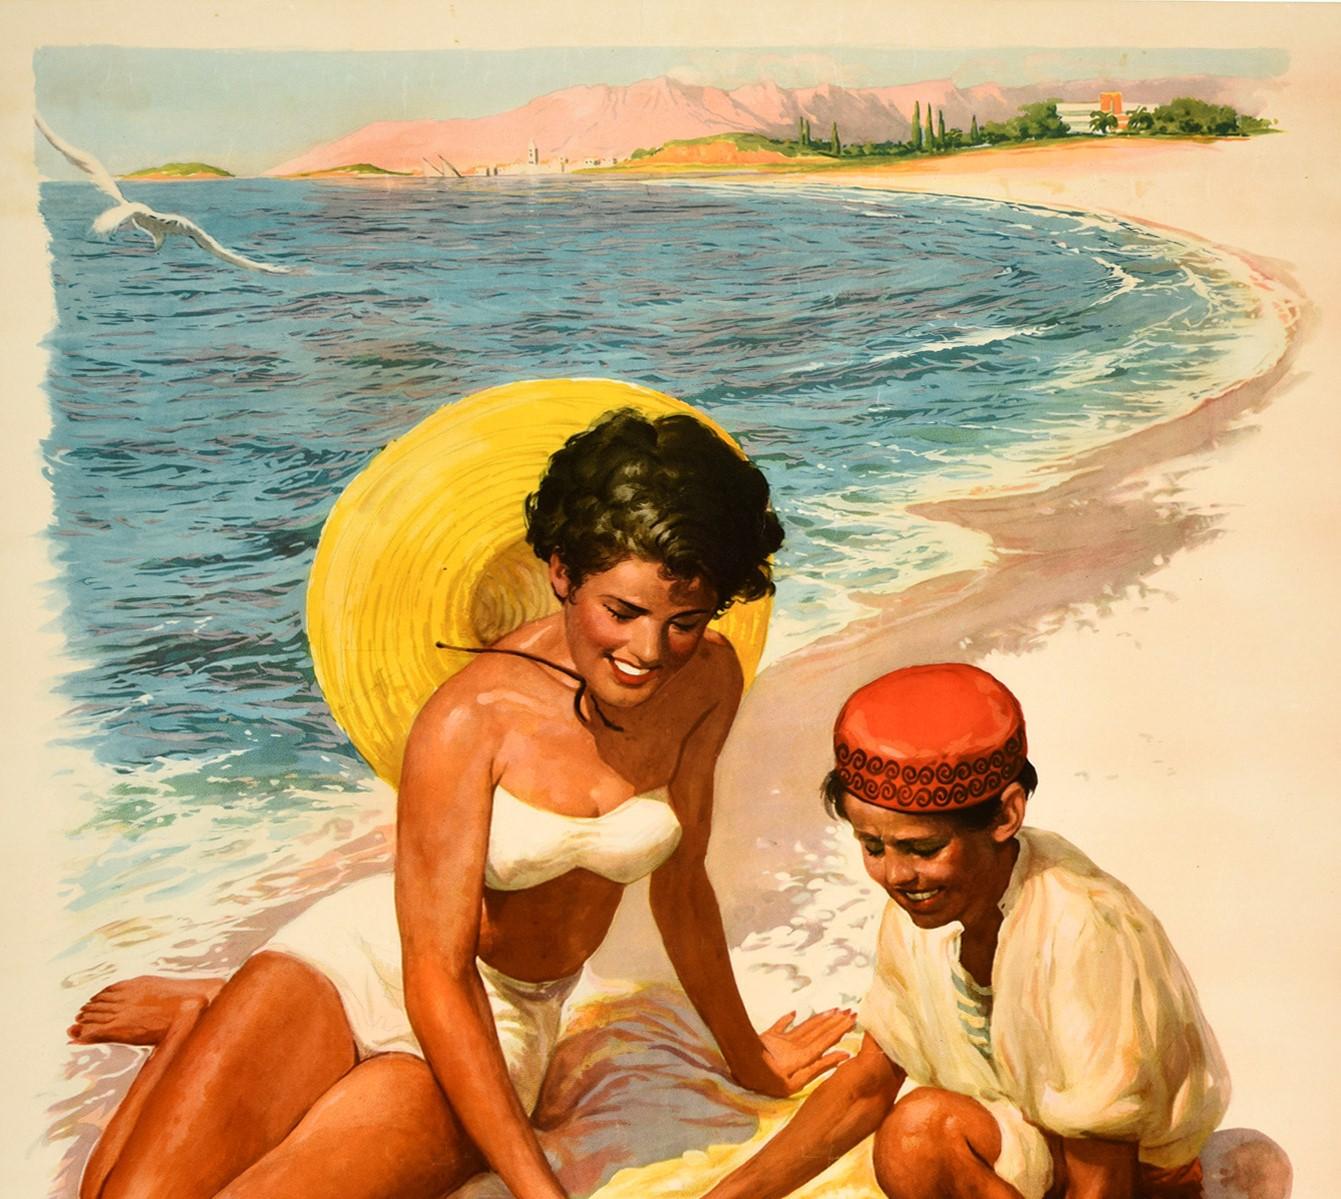 Original vintage travel poster - Come to Yugoslavia - featuring great artwork of a boy presenting a basket of fresh fruit to a smiling lady in a white bikini and summer straw hat sitting on a beach with the waves splashing on the sand in the